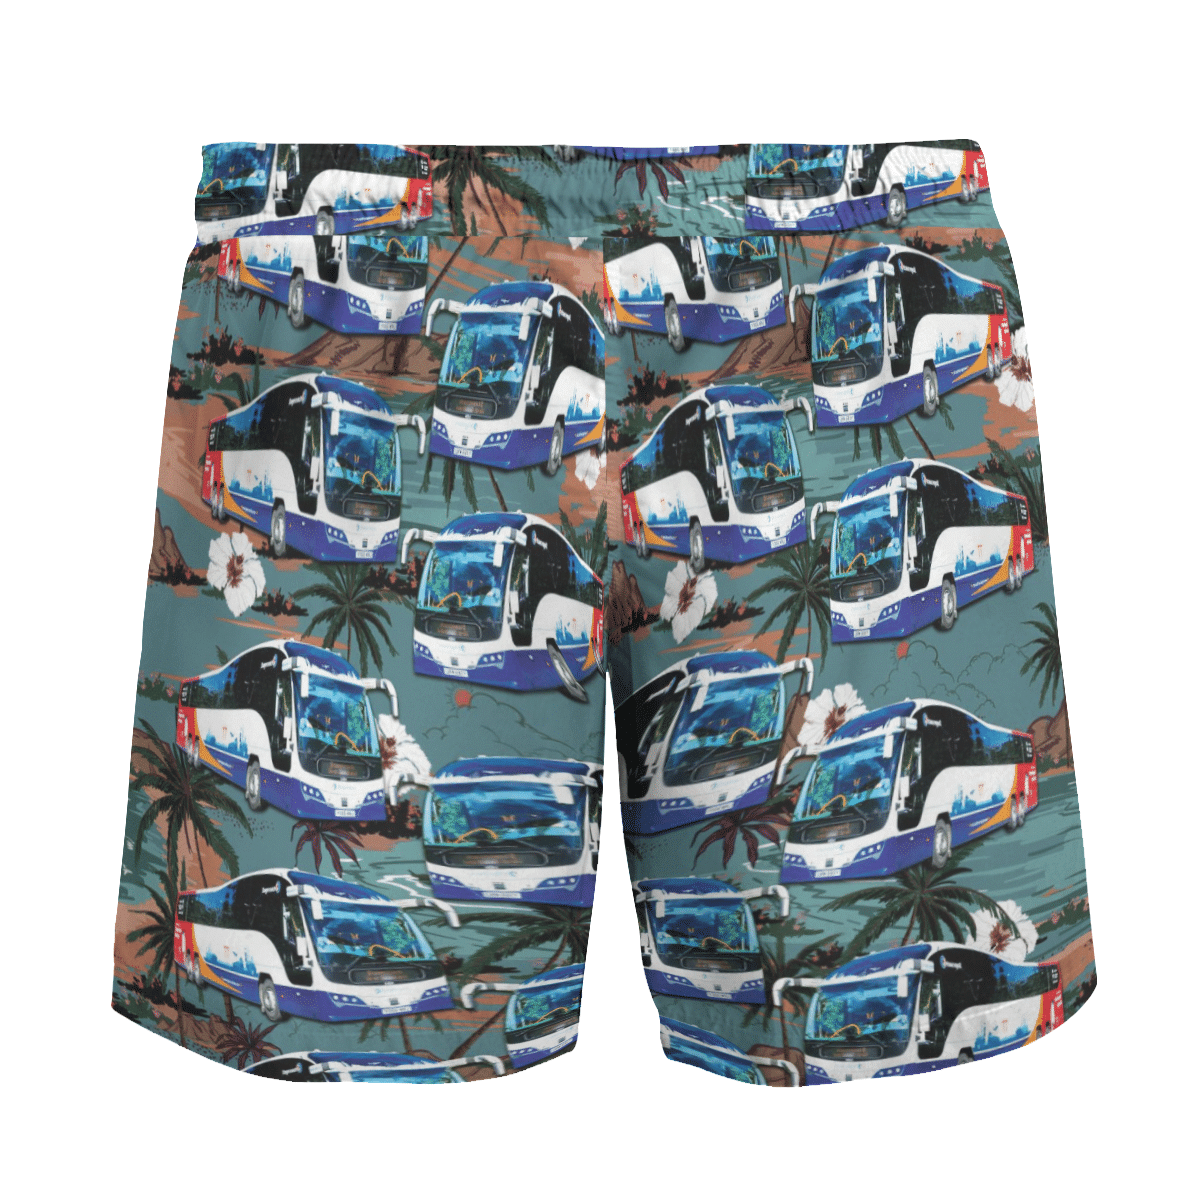 Find yourself or a group of friends a cool beach outfit idea 7